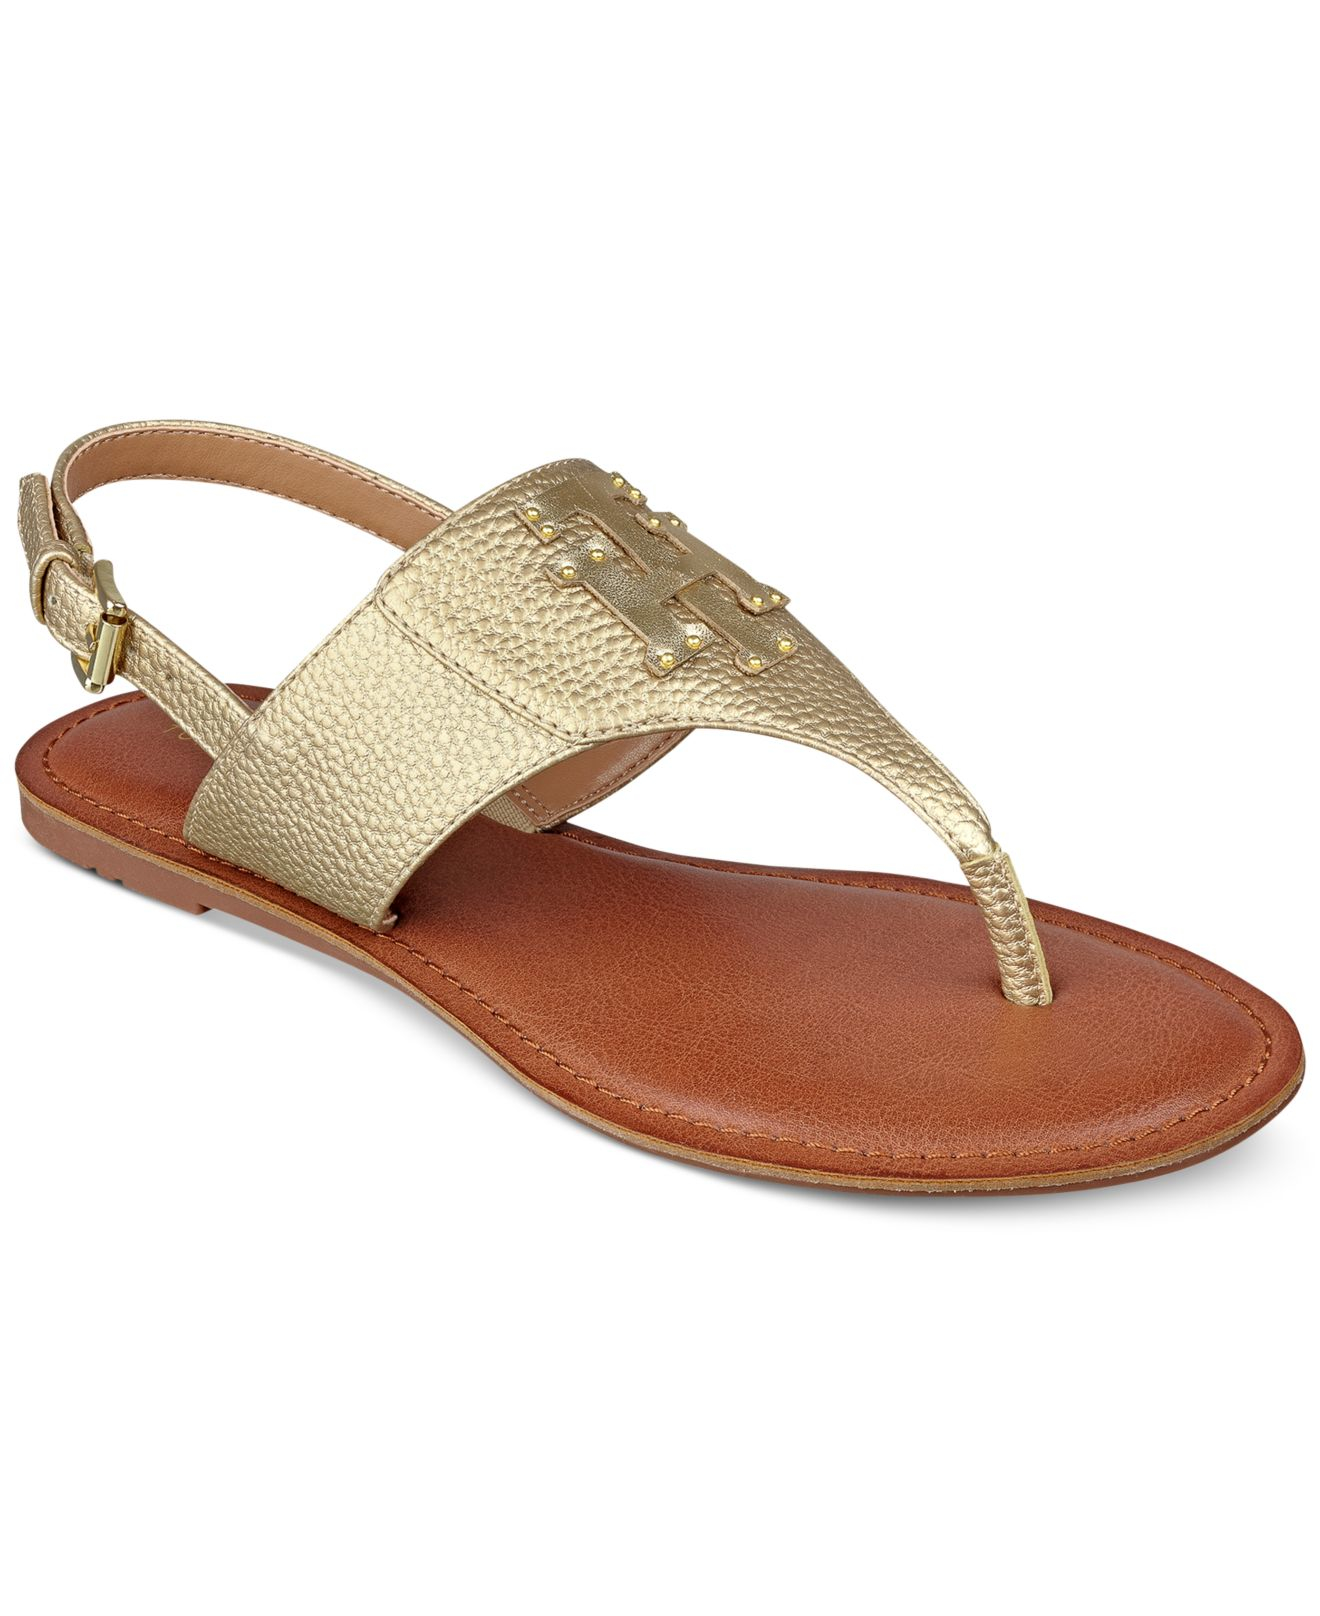 Lyst - Tommy Hilfiger Laney Flat Thong Sandals in Metallic